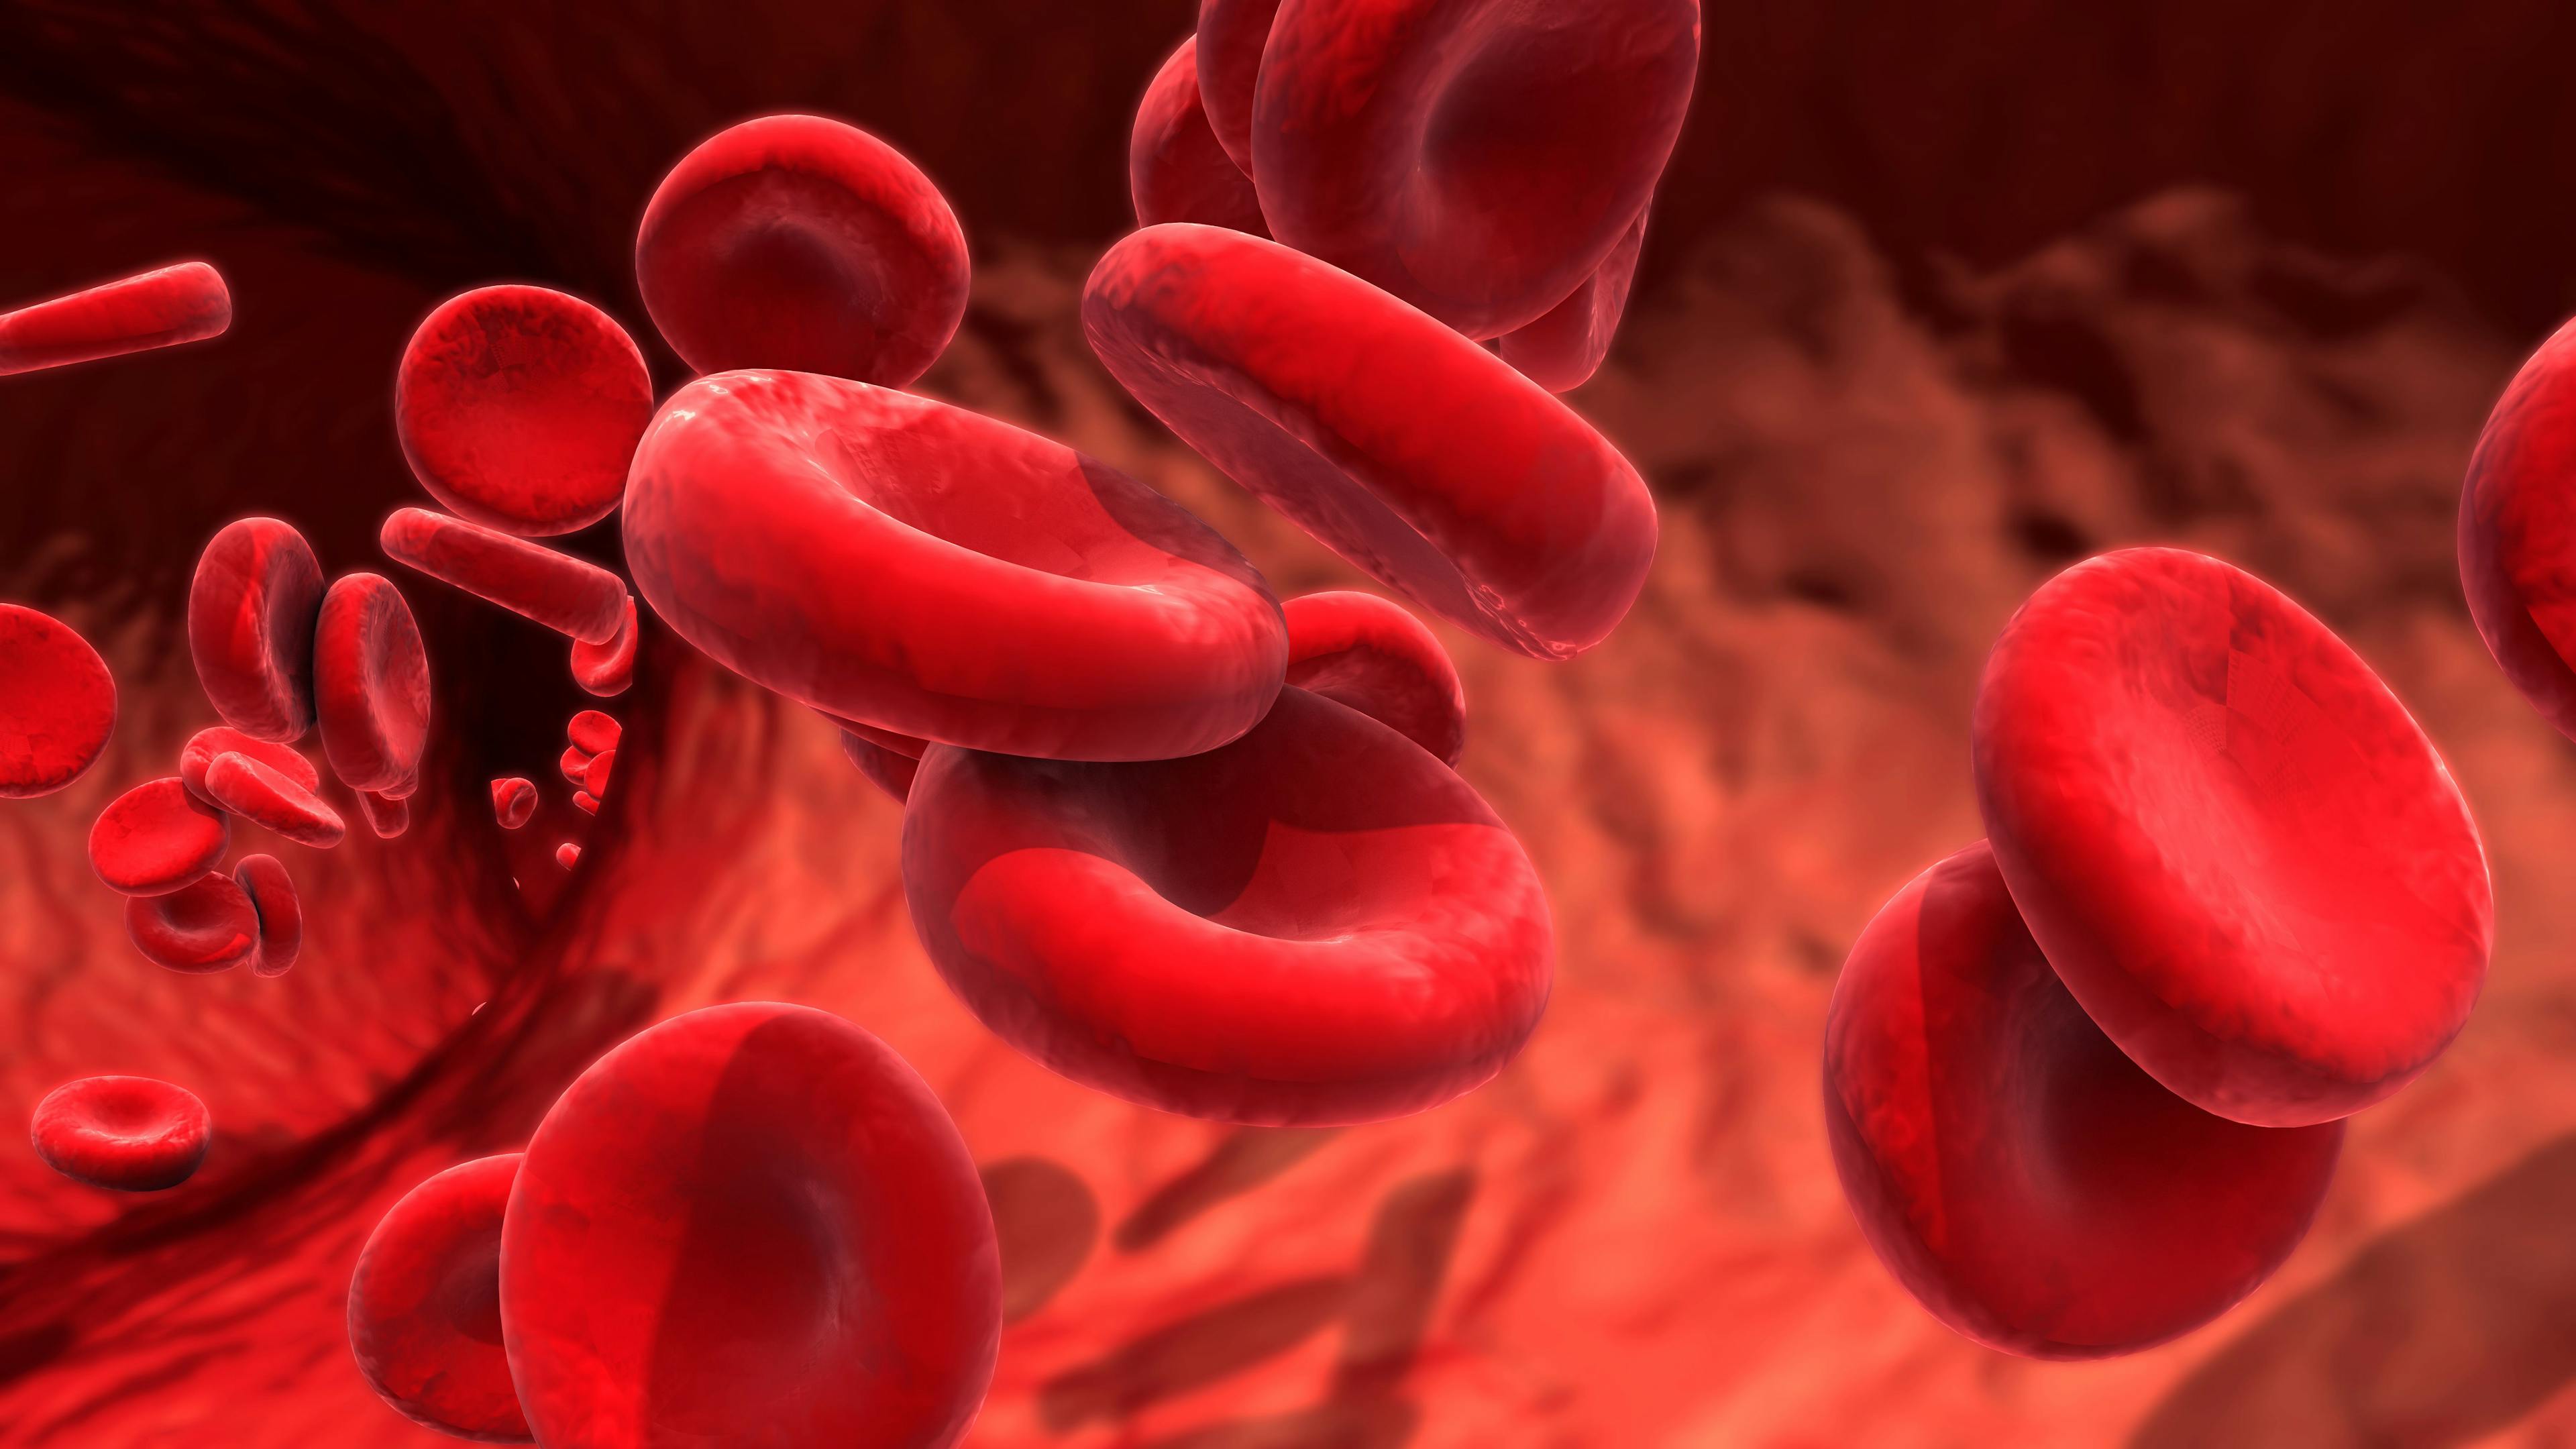 Most Patients With β-Thalassemia Achieve Transfusion Independence With Exa-Cel Therapy 